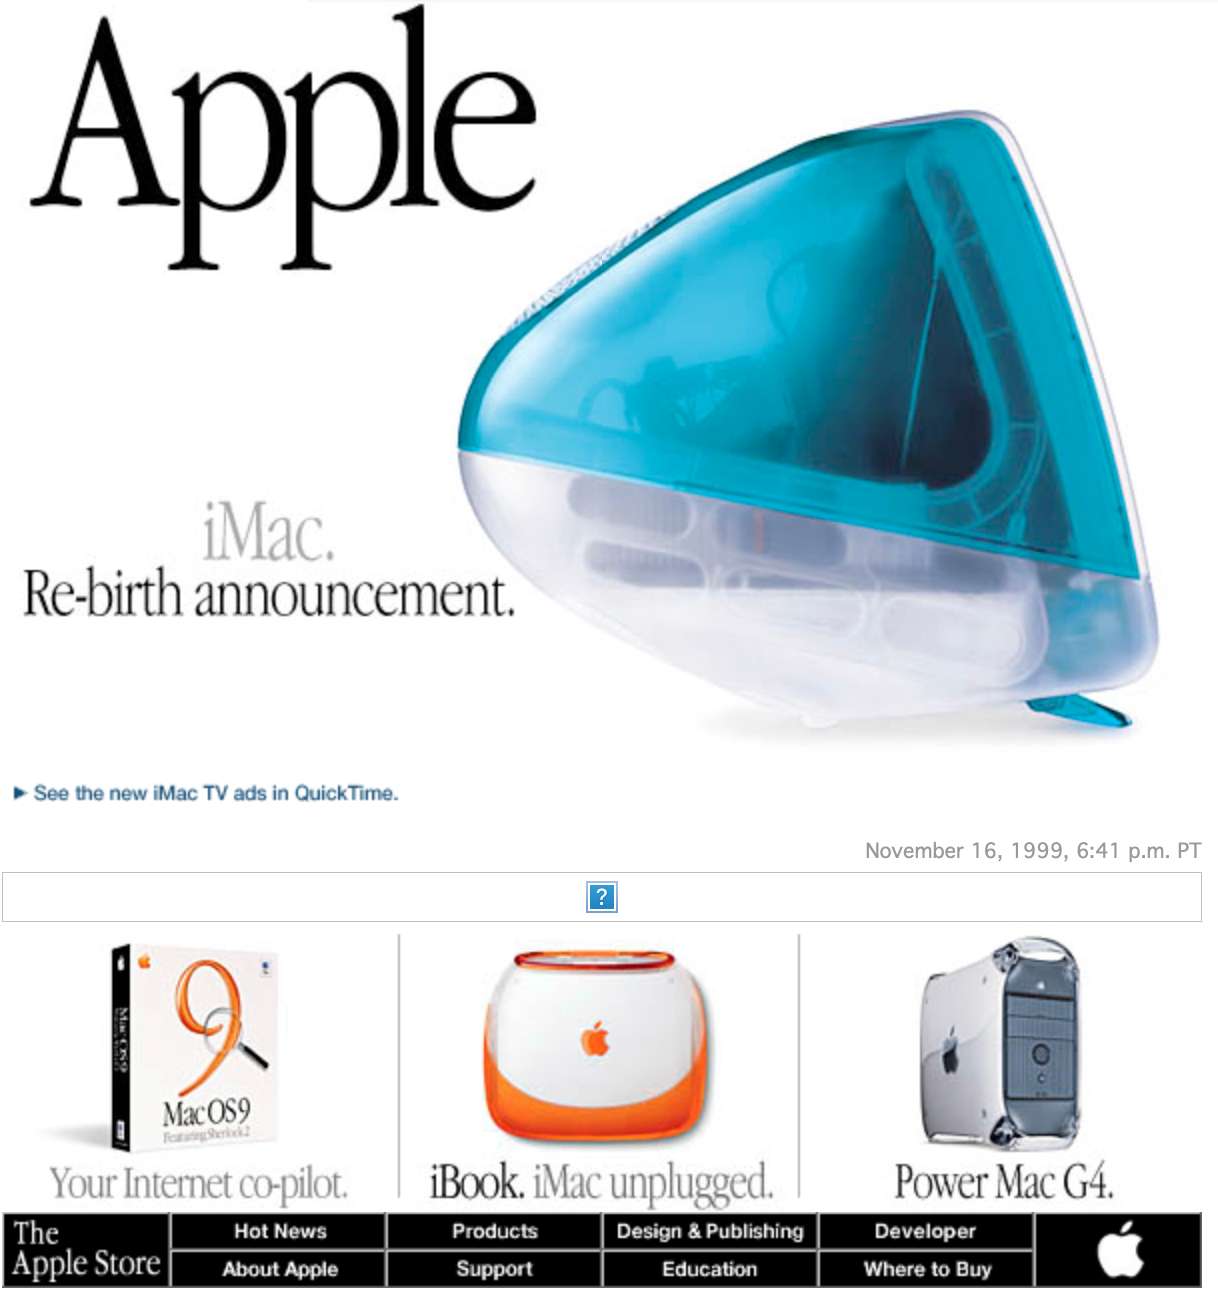 Image from Apple website in 1999 showing graphic elements as text